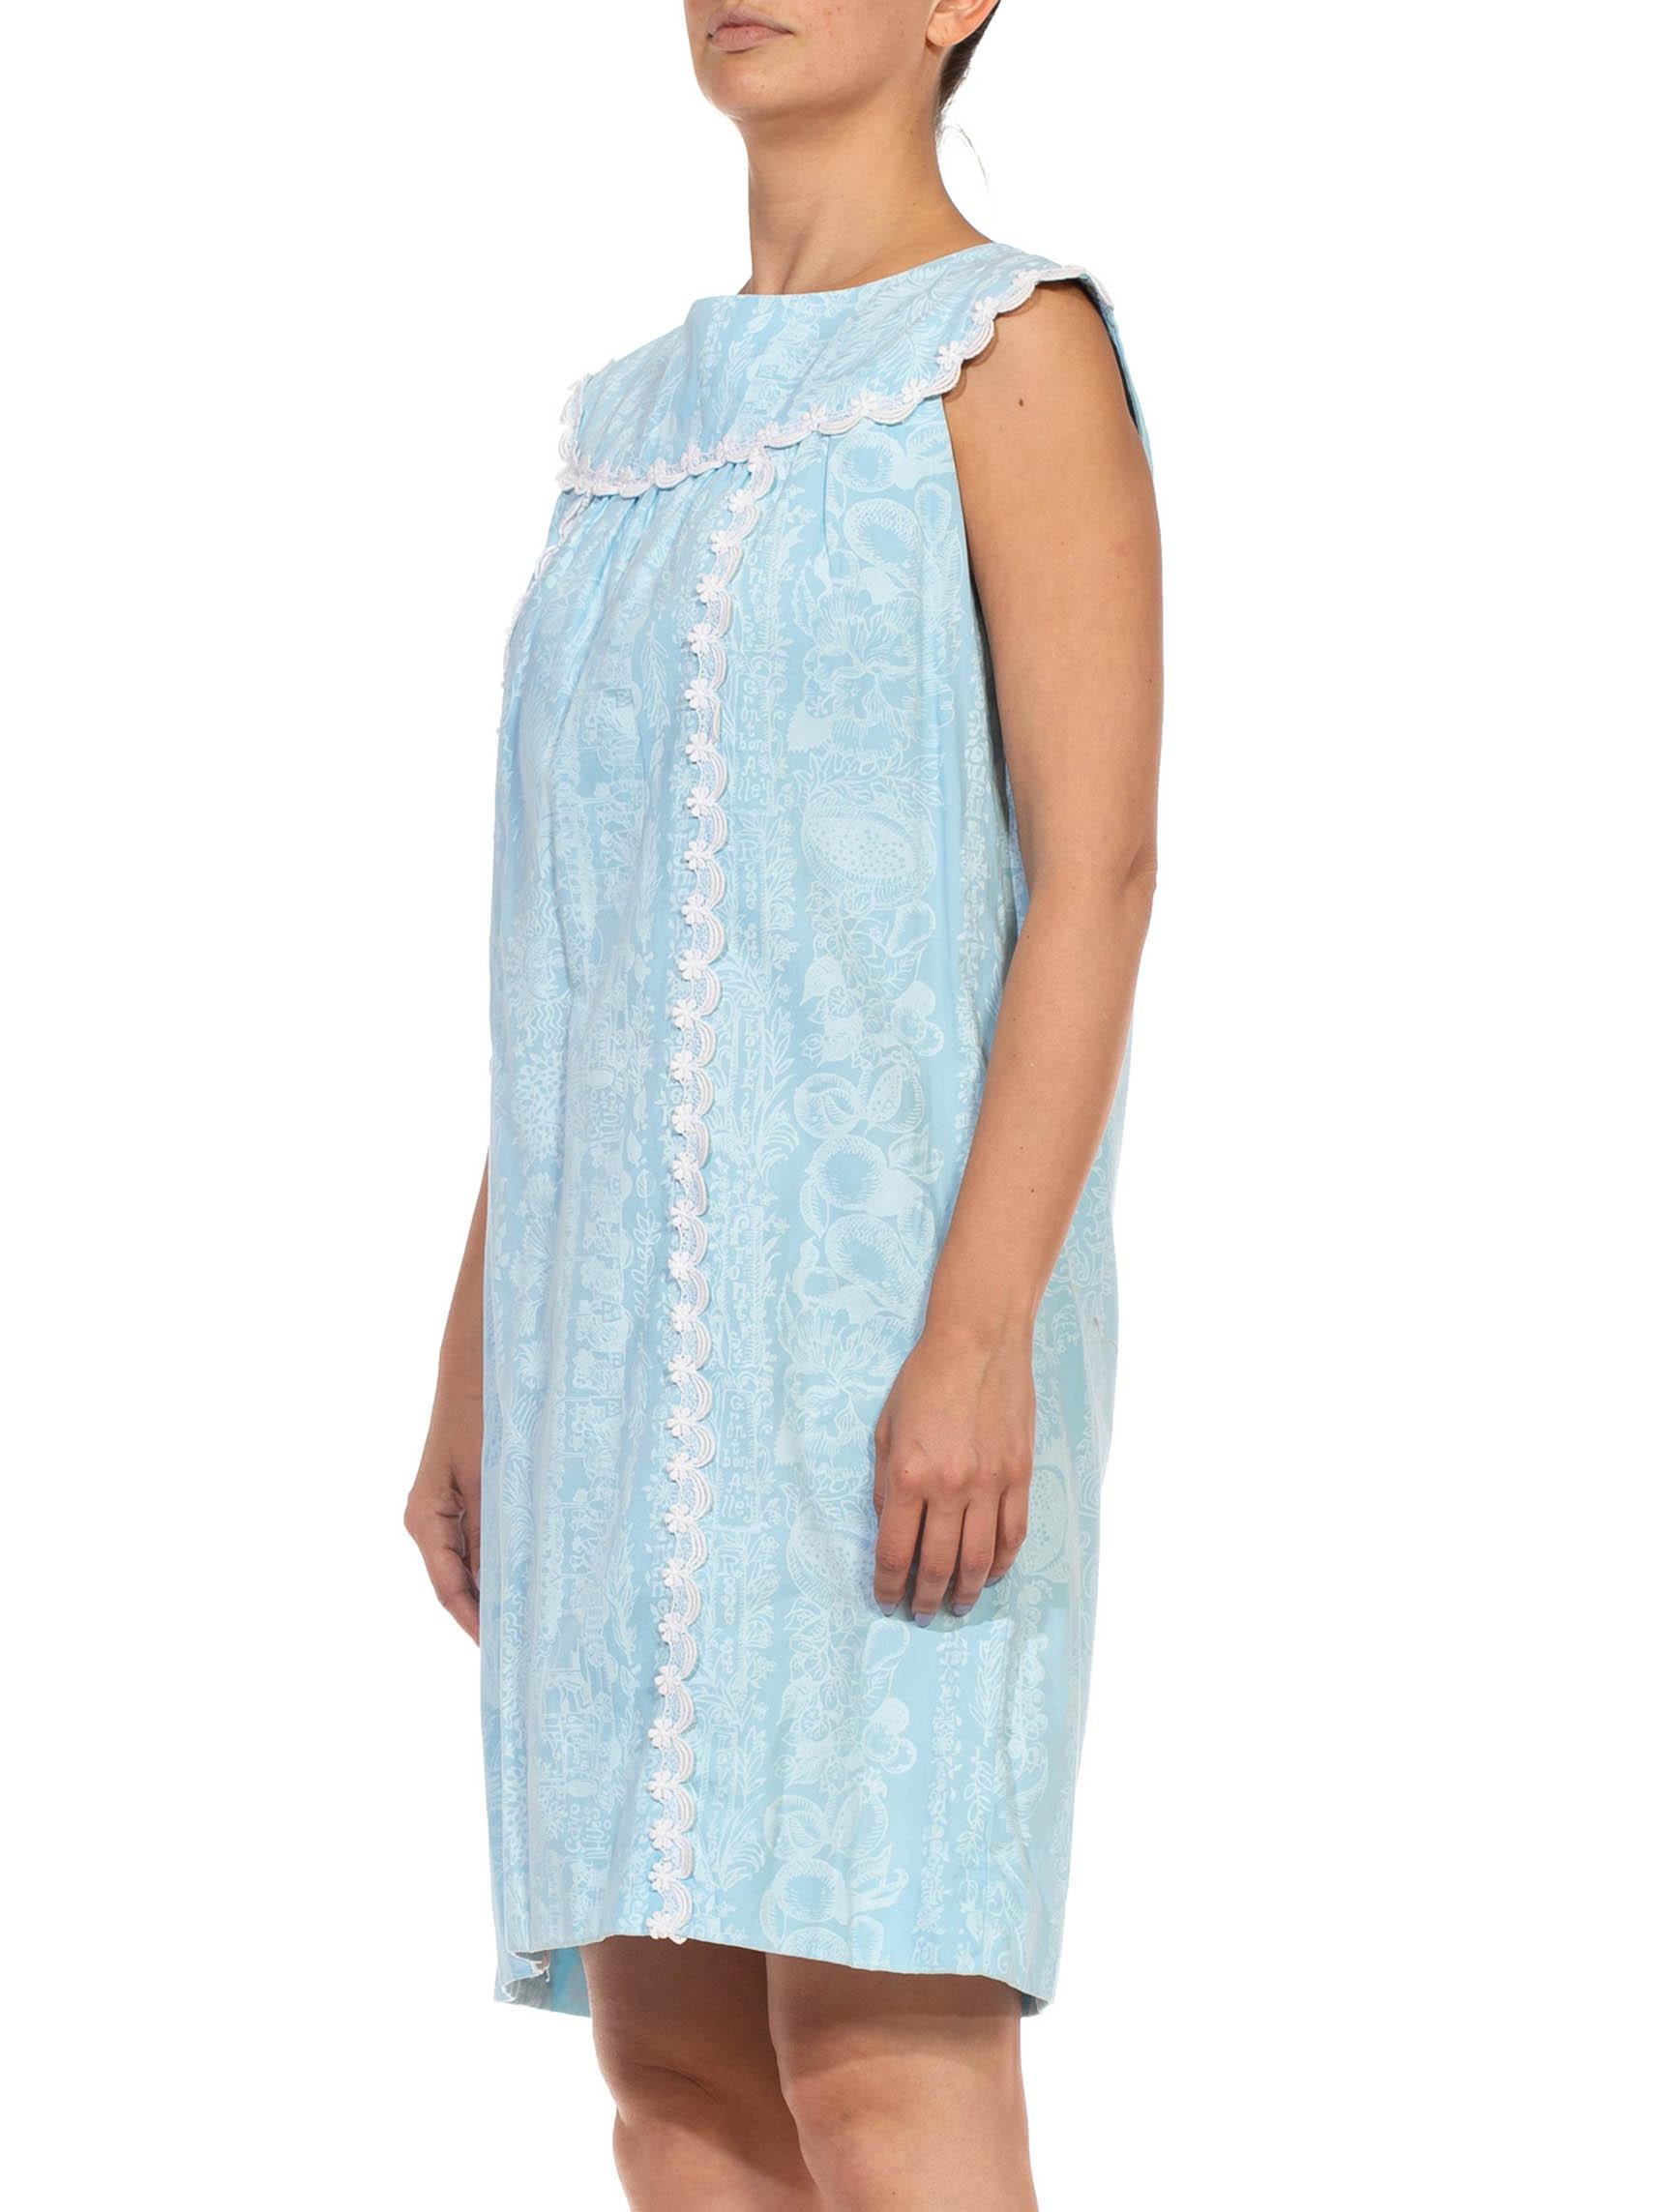 Women's 1960S LILLY PULITZER Blue & White Floral Organic Cotton Lace Sleveless Dress For Sale